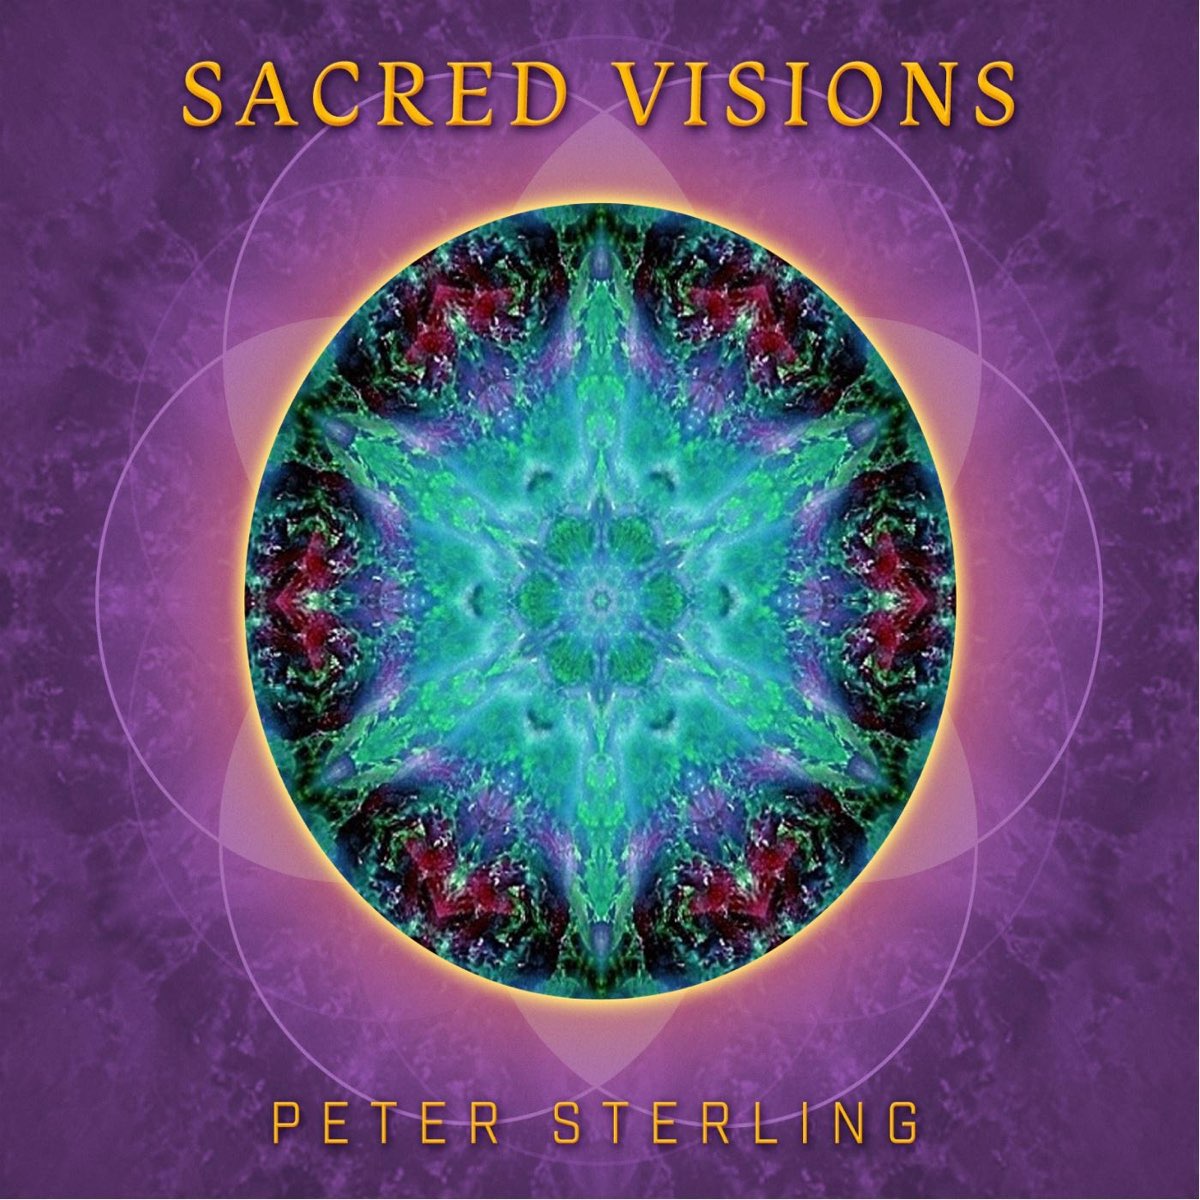 PETER STERLING SACRED VISIONS